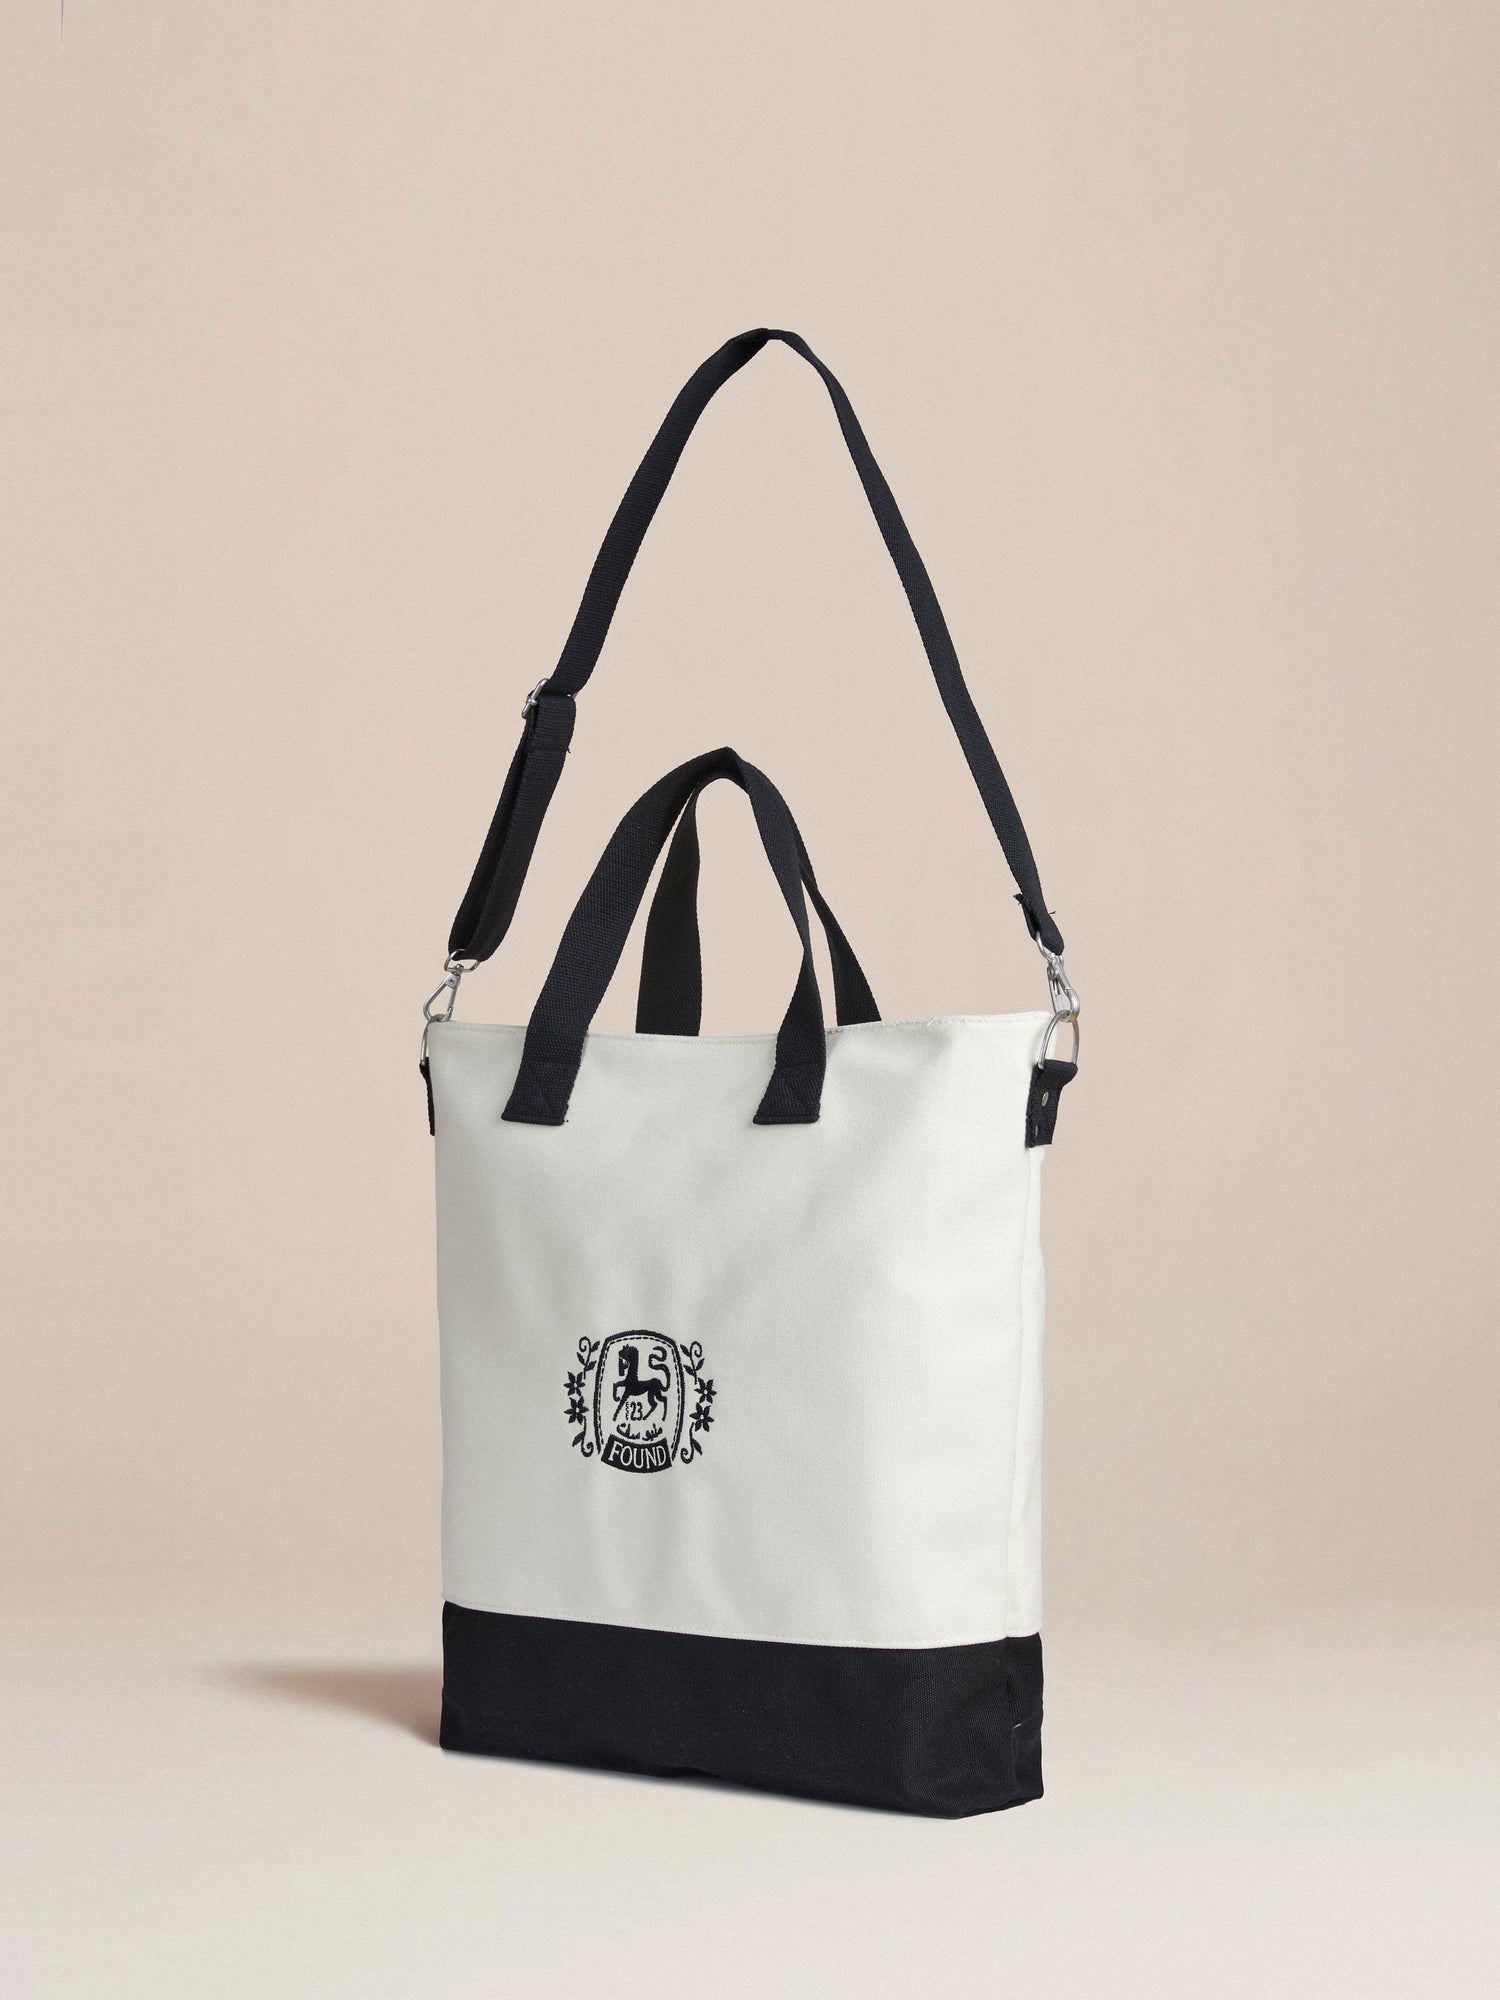 A black and white Horse Logo Crest Canvas Bag from Profound, made from premium cotton twill.